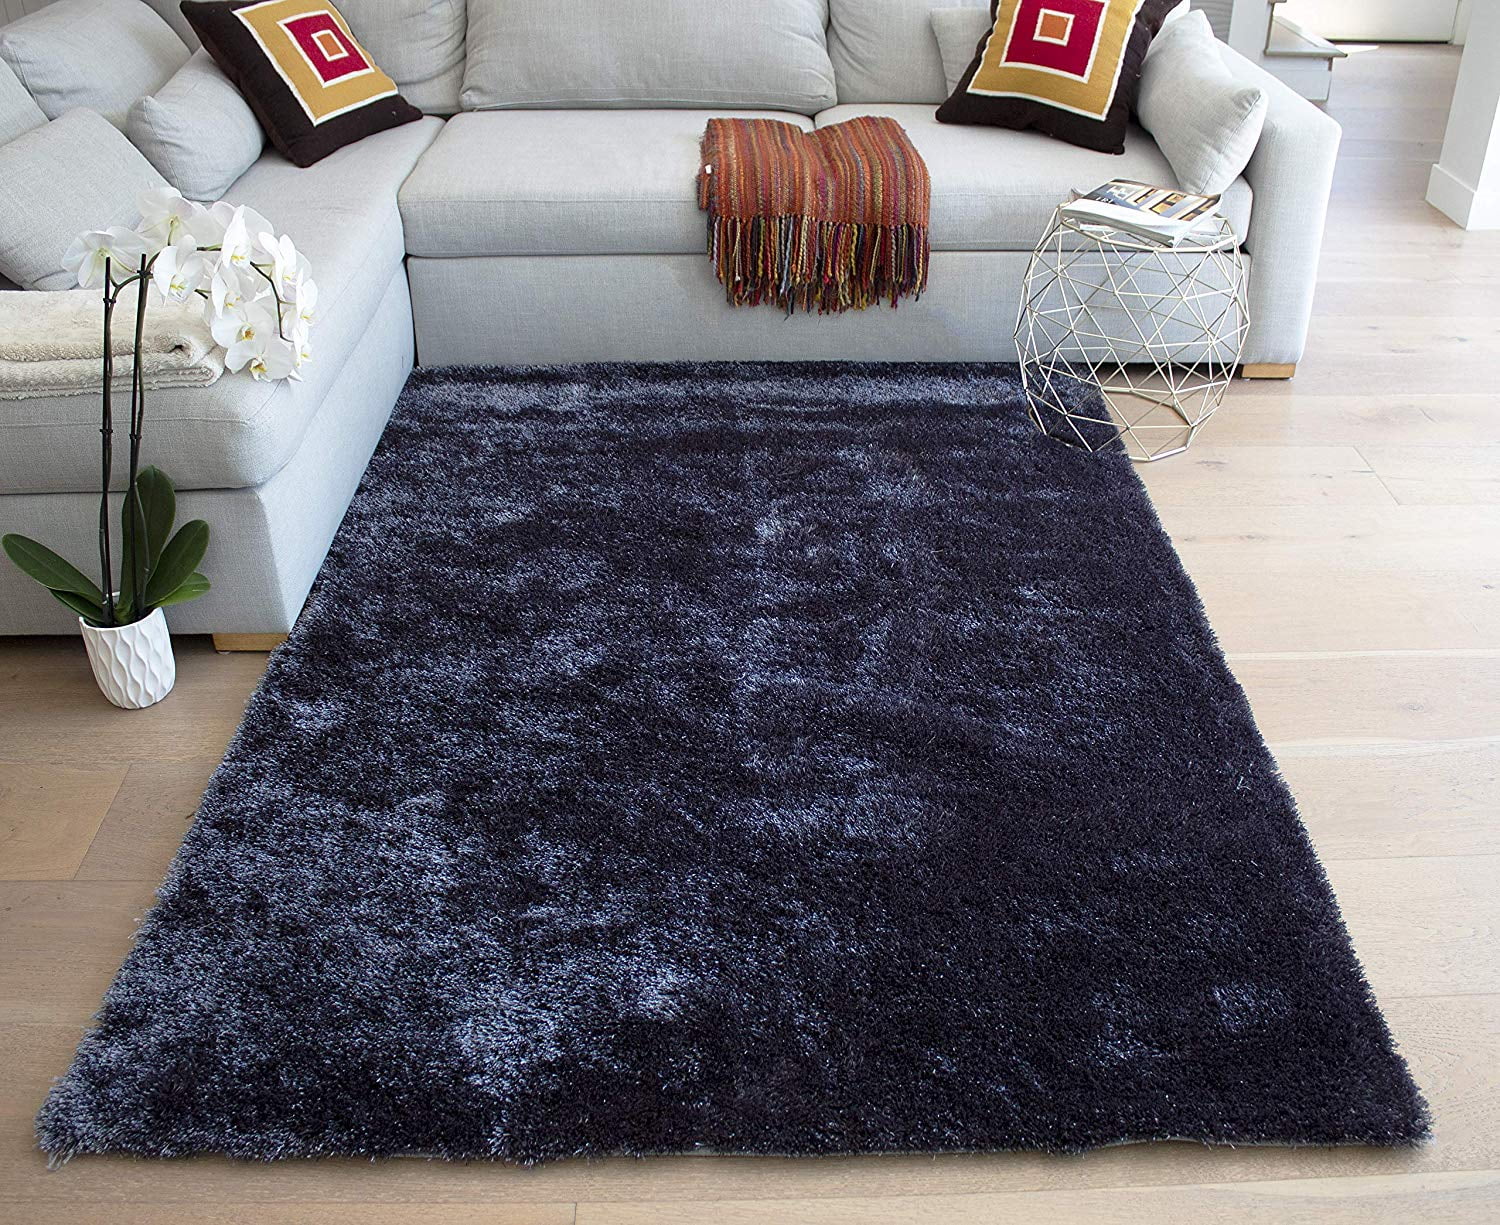 Silver Fluffy Rugs Large Thick Shaggy Premium Quality Soft Cosy Bedroom Carpet 